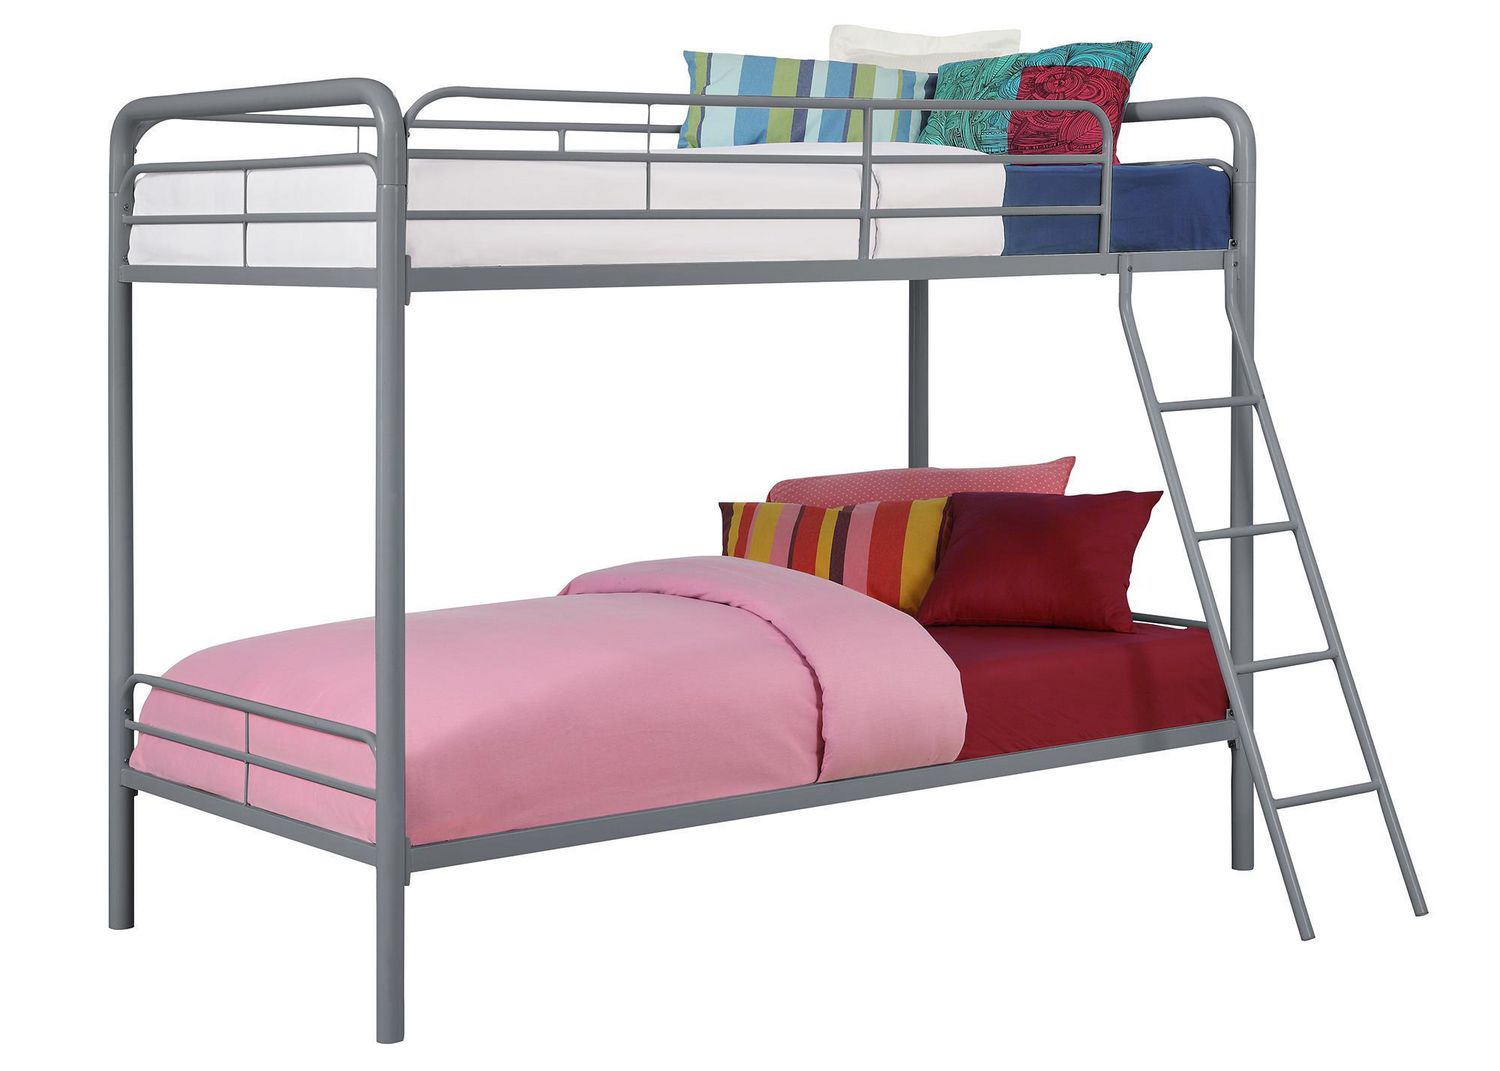 walmart bunk beds twin over twin mattresses included